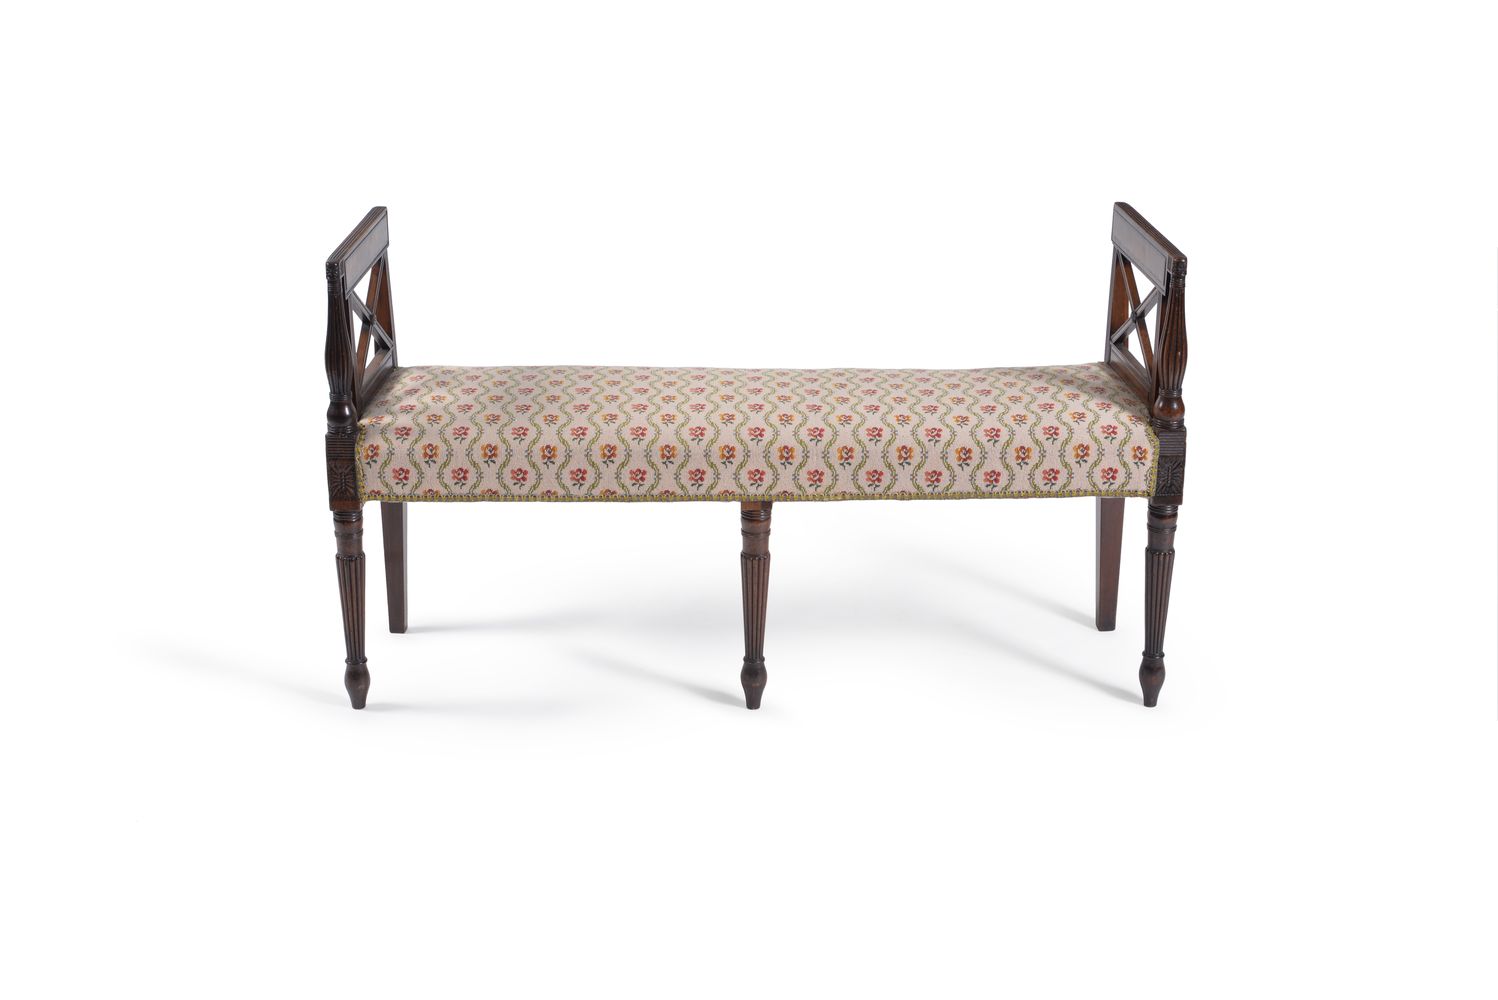 An unusual Regency mahogany window seat, circa 1815, the angled rectangular sides with x-shaped